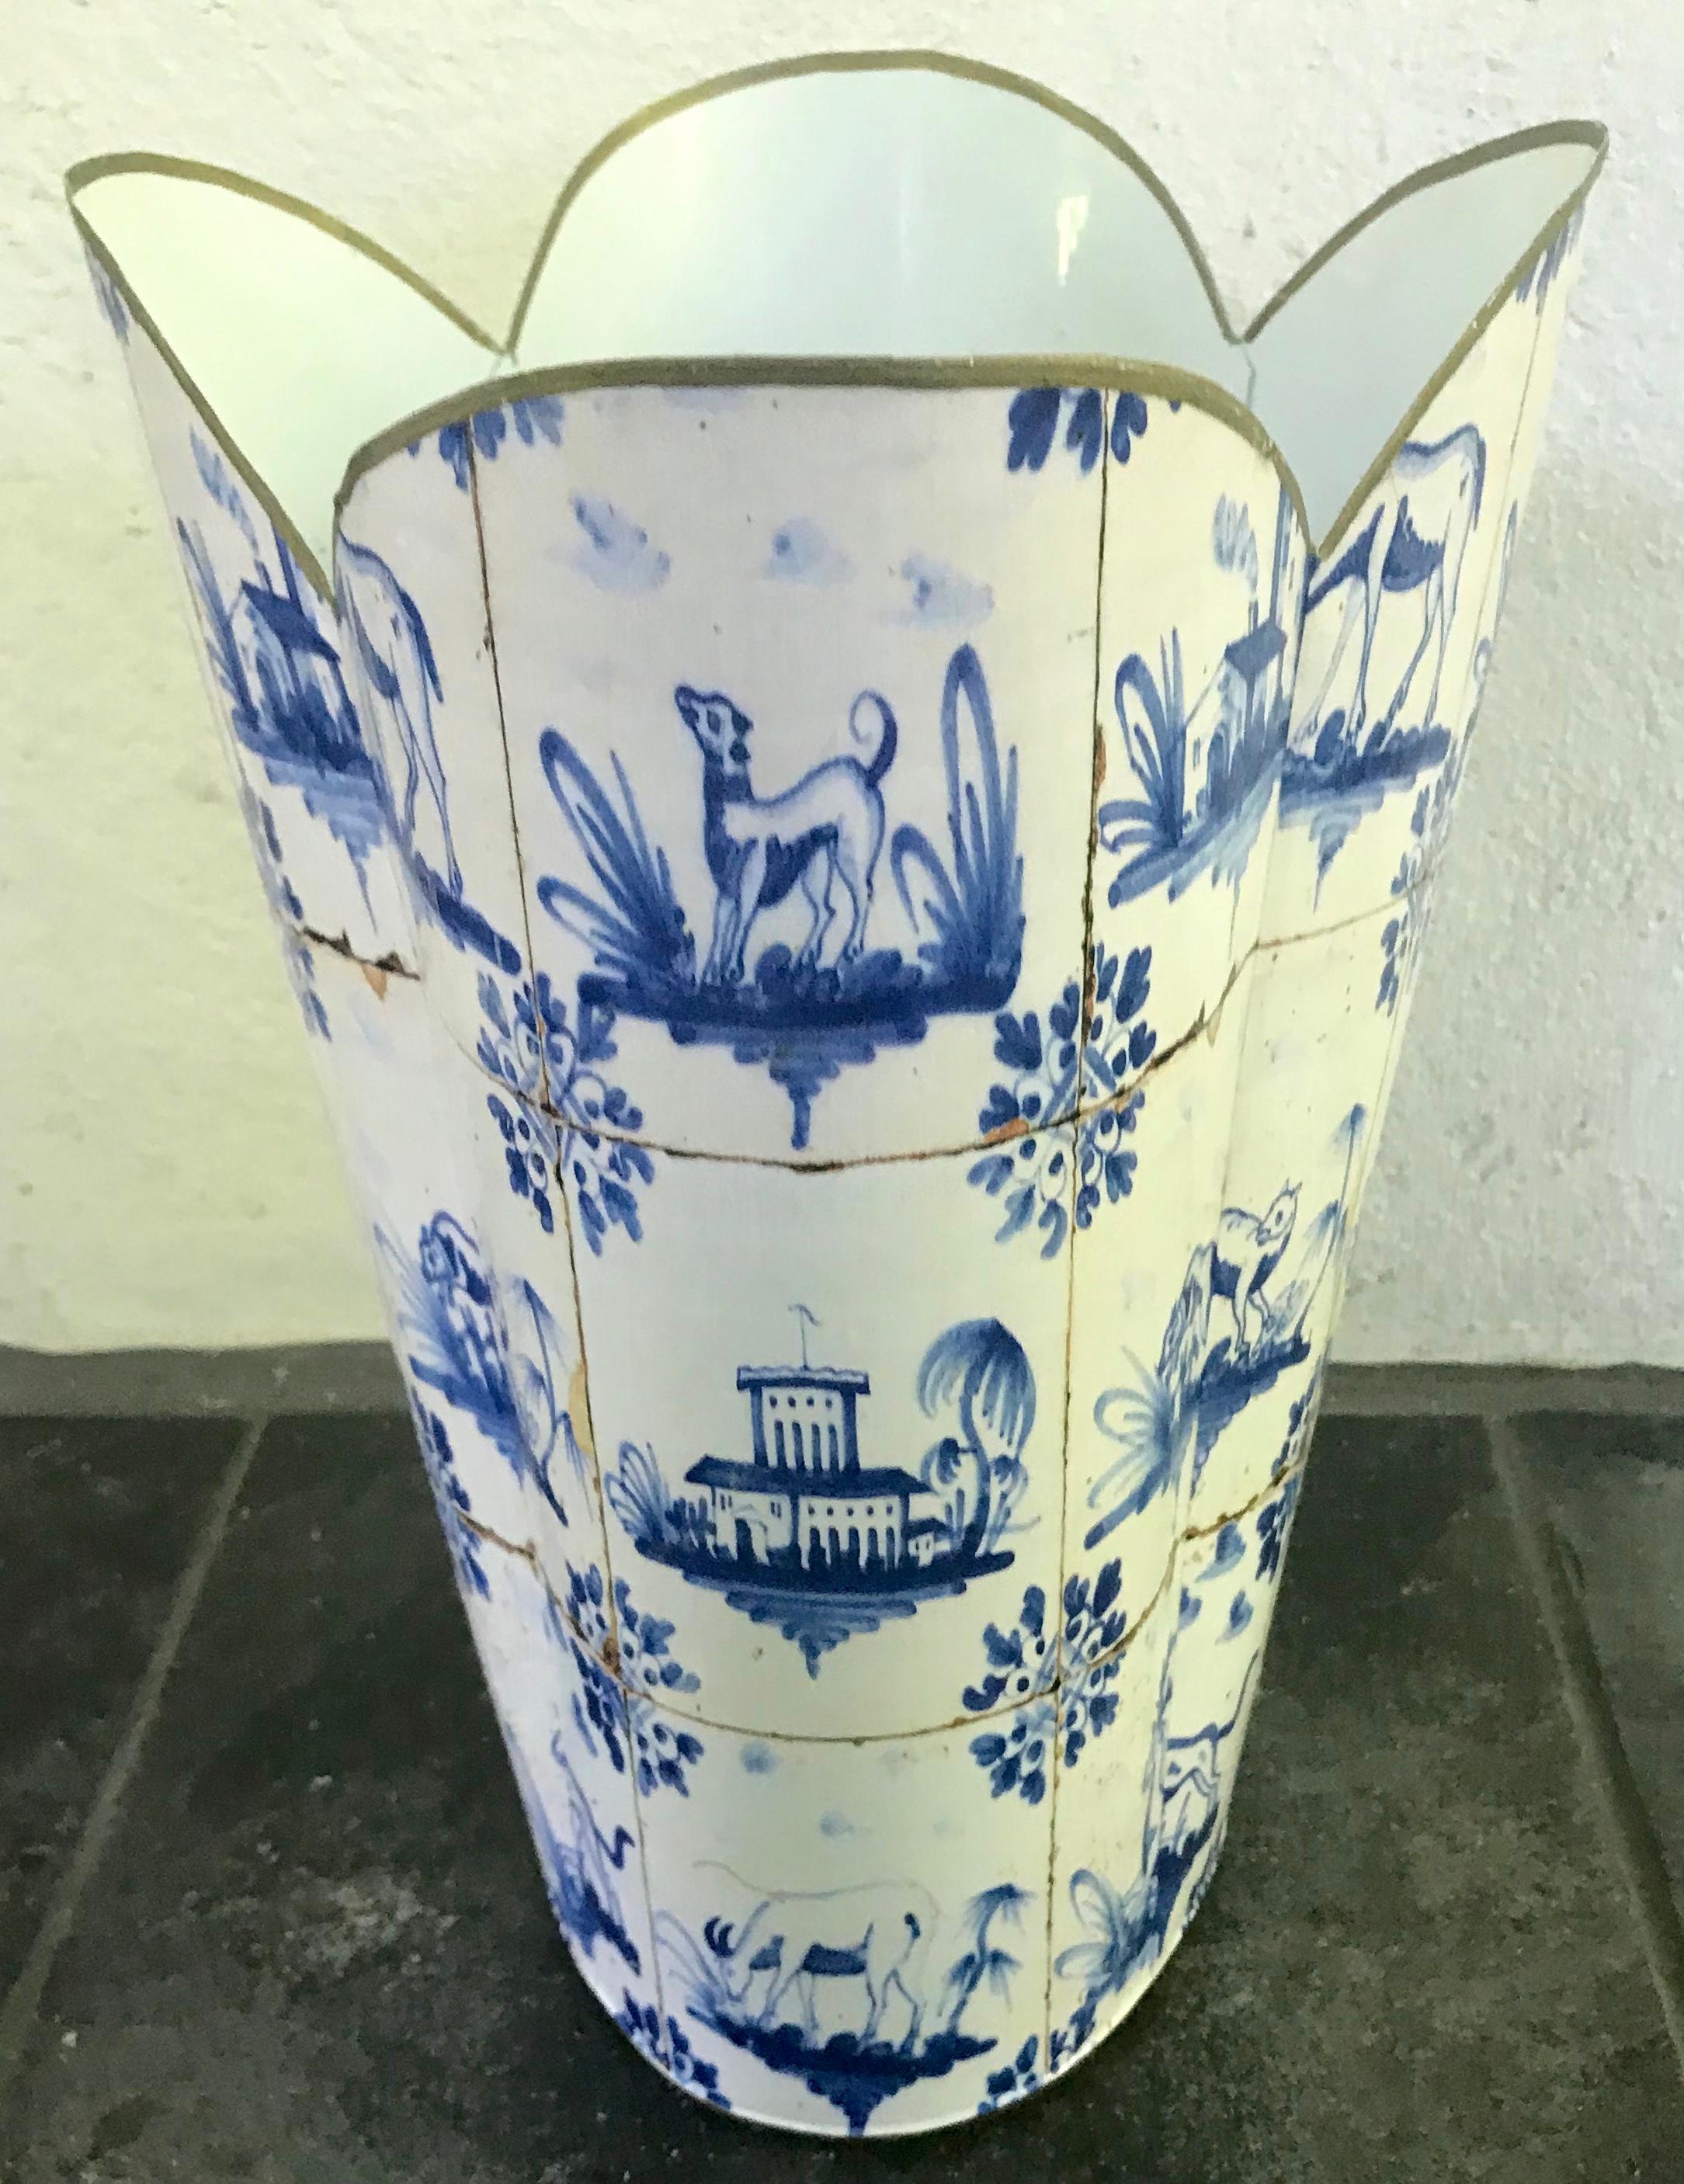 Blue and white tole wastebasket. Dutch tile print lacquered litter basket with oval base rising to an outward shaped gilt scalloped top. Contemporary fresh Dutch look in rich blue and white. United States, 20th century.
Dimensions: 12” H x 10.5” L